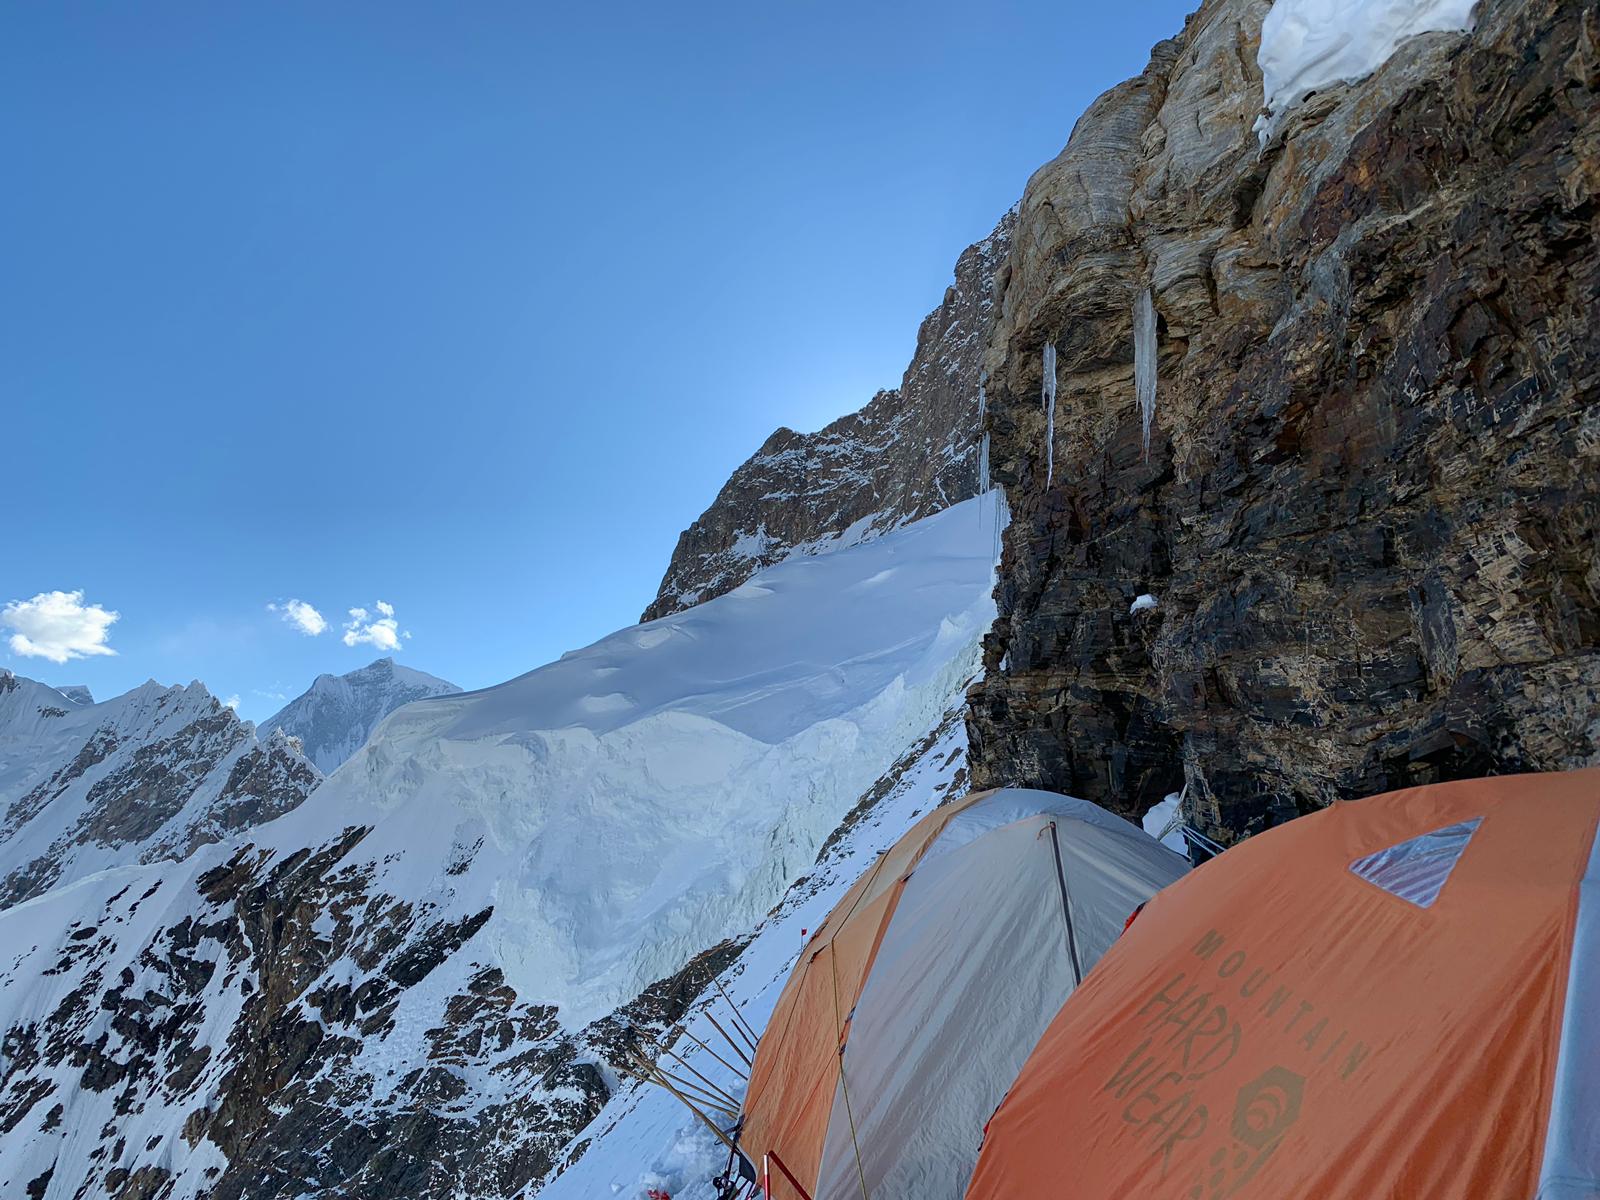 Camp 2 on the Cesen route